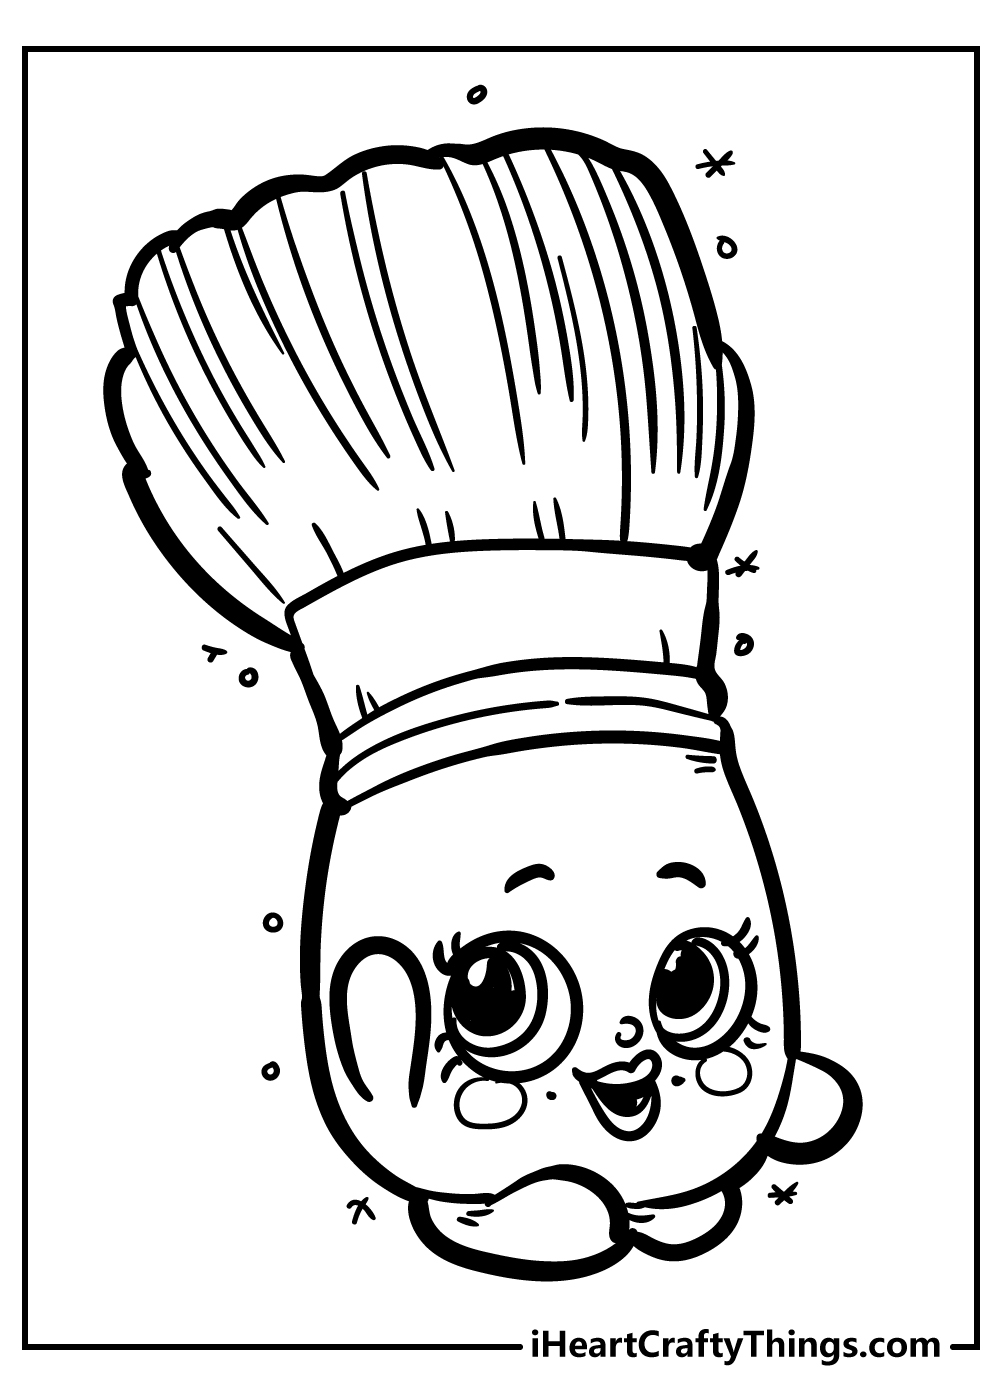 Shopkins Coloring Pages Updated 21